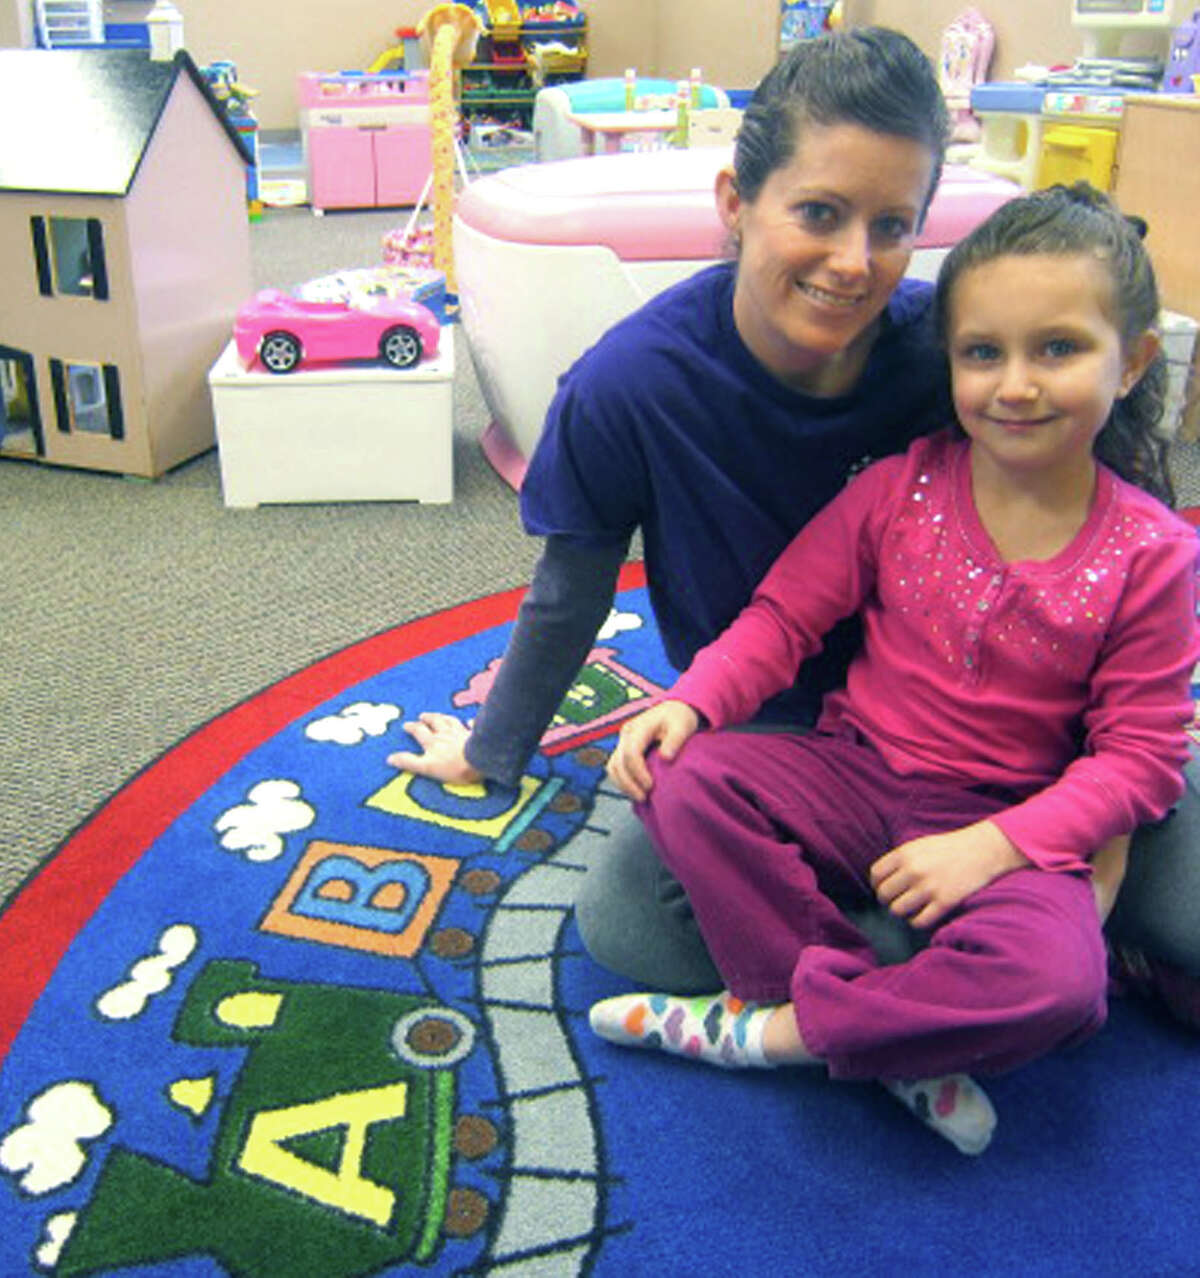 Jennifer Benedict brings 22 years' experience in child care to her new business - Kids In Action. On some days off from school, her 6-year-old daughter, Jamee, accompanies Ms. Benedict to the welcoming New Milford center. February 2013